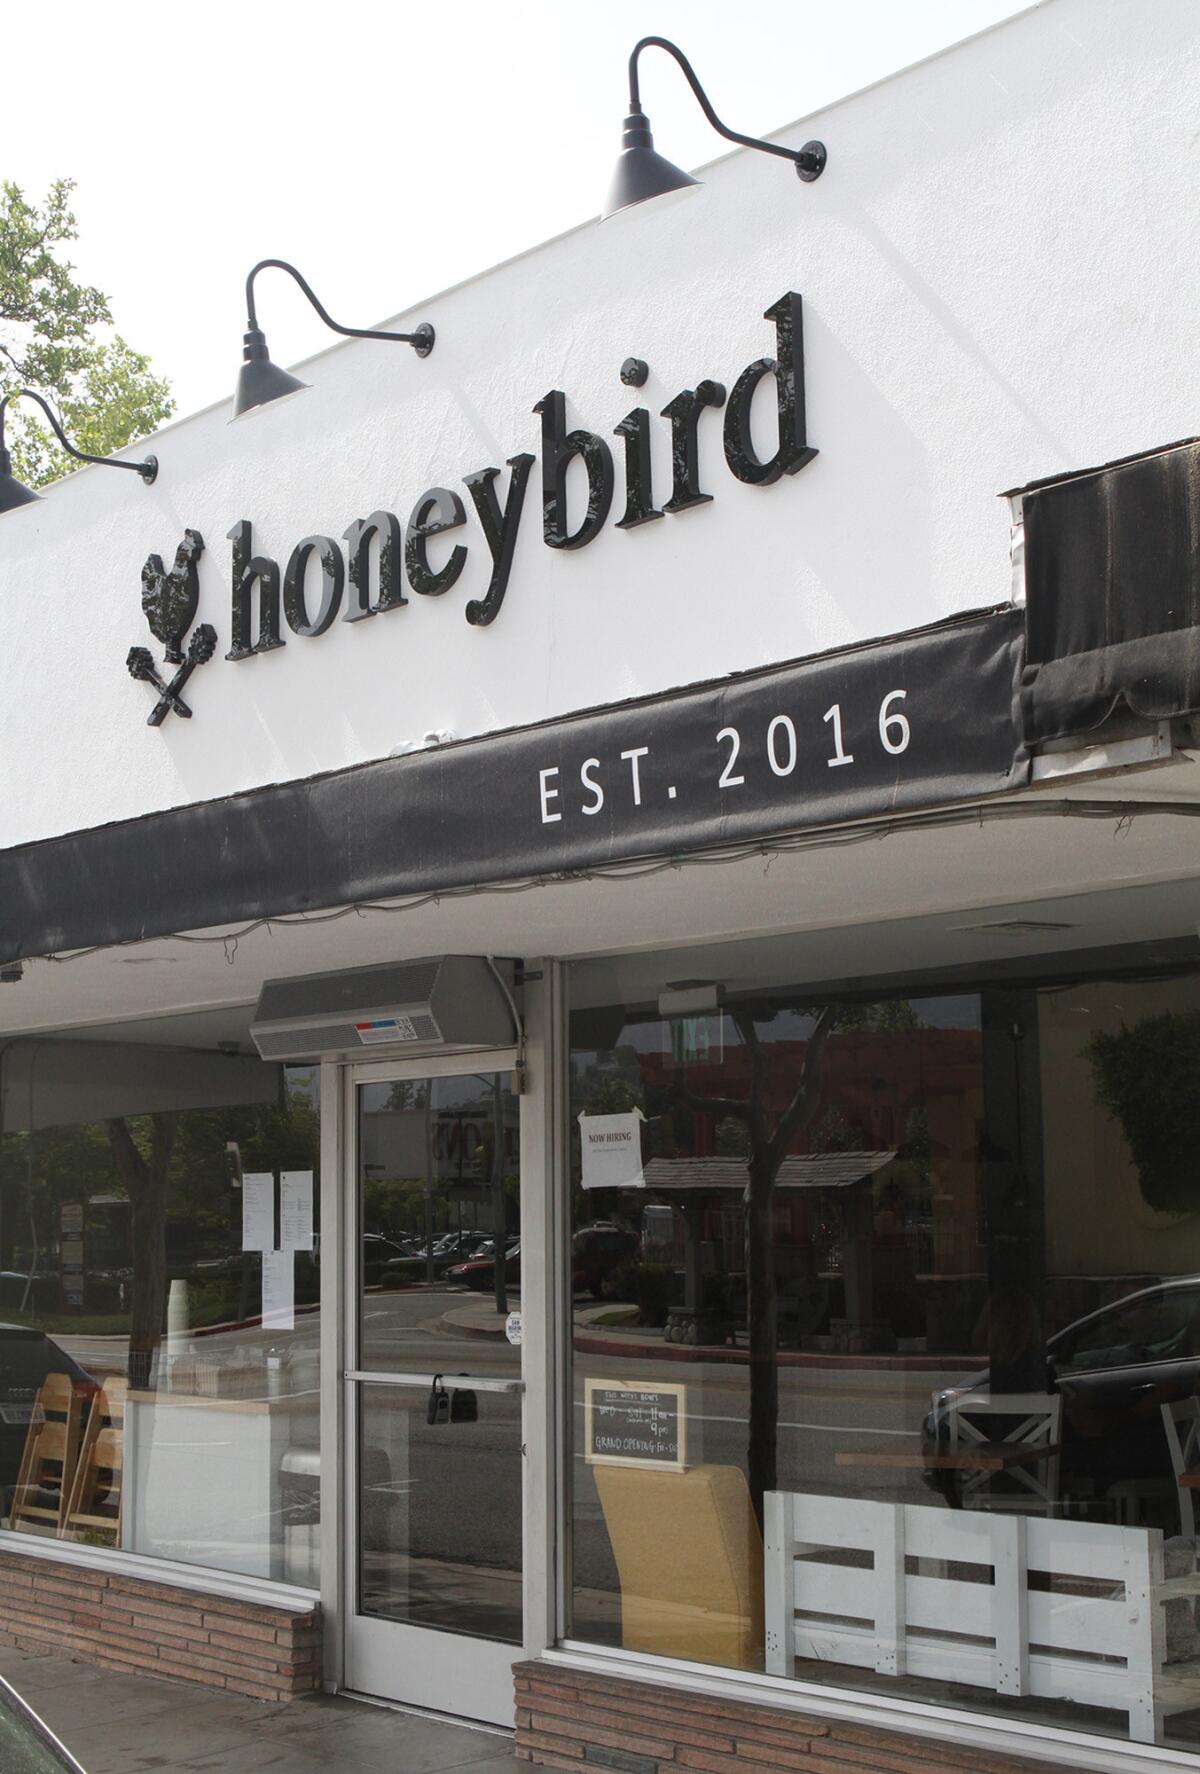 Honeybird will showcase chef Phil Lee’s signature take on fried chicken and Southern favorites such as bacon and cheddar biscuits, collard greens, mashed potatoes and macaroni and cheese.